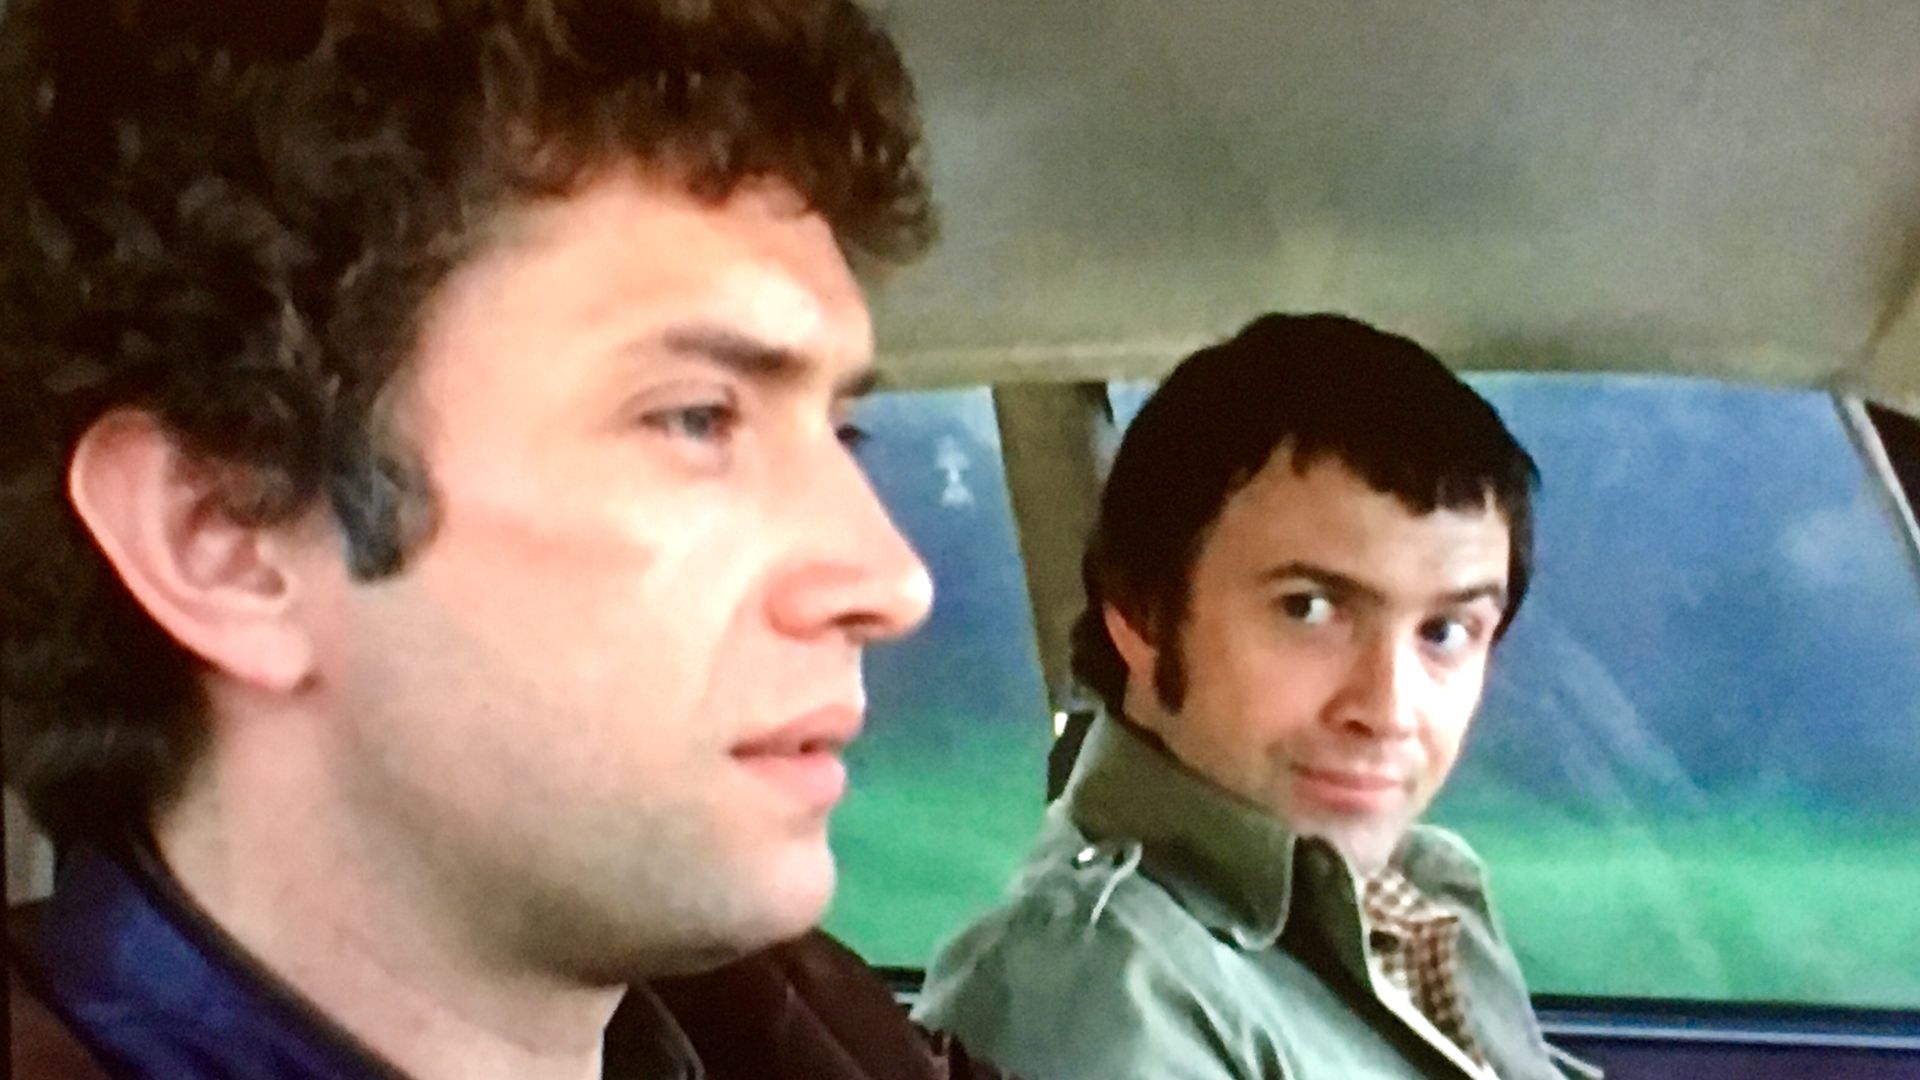 The Professionals background